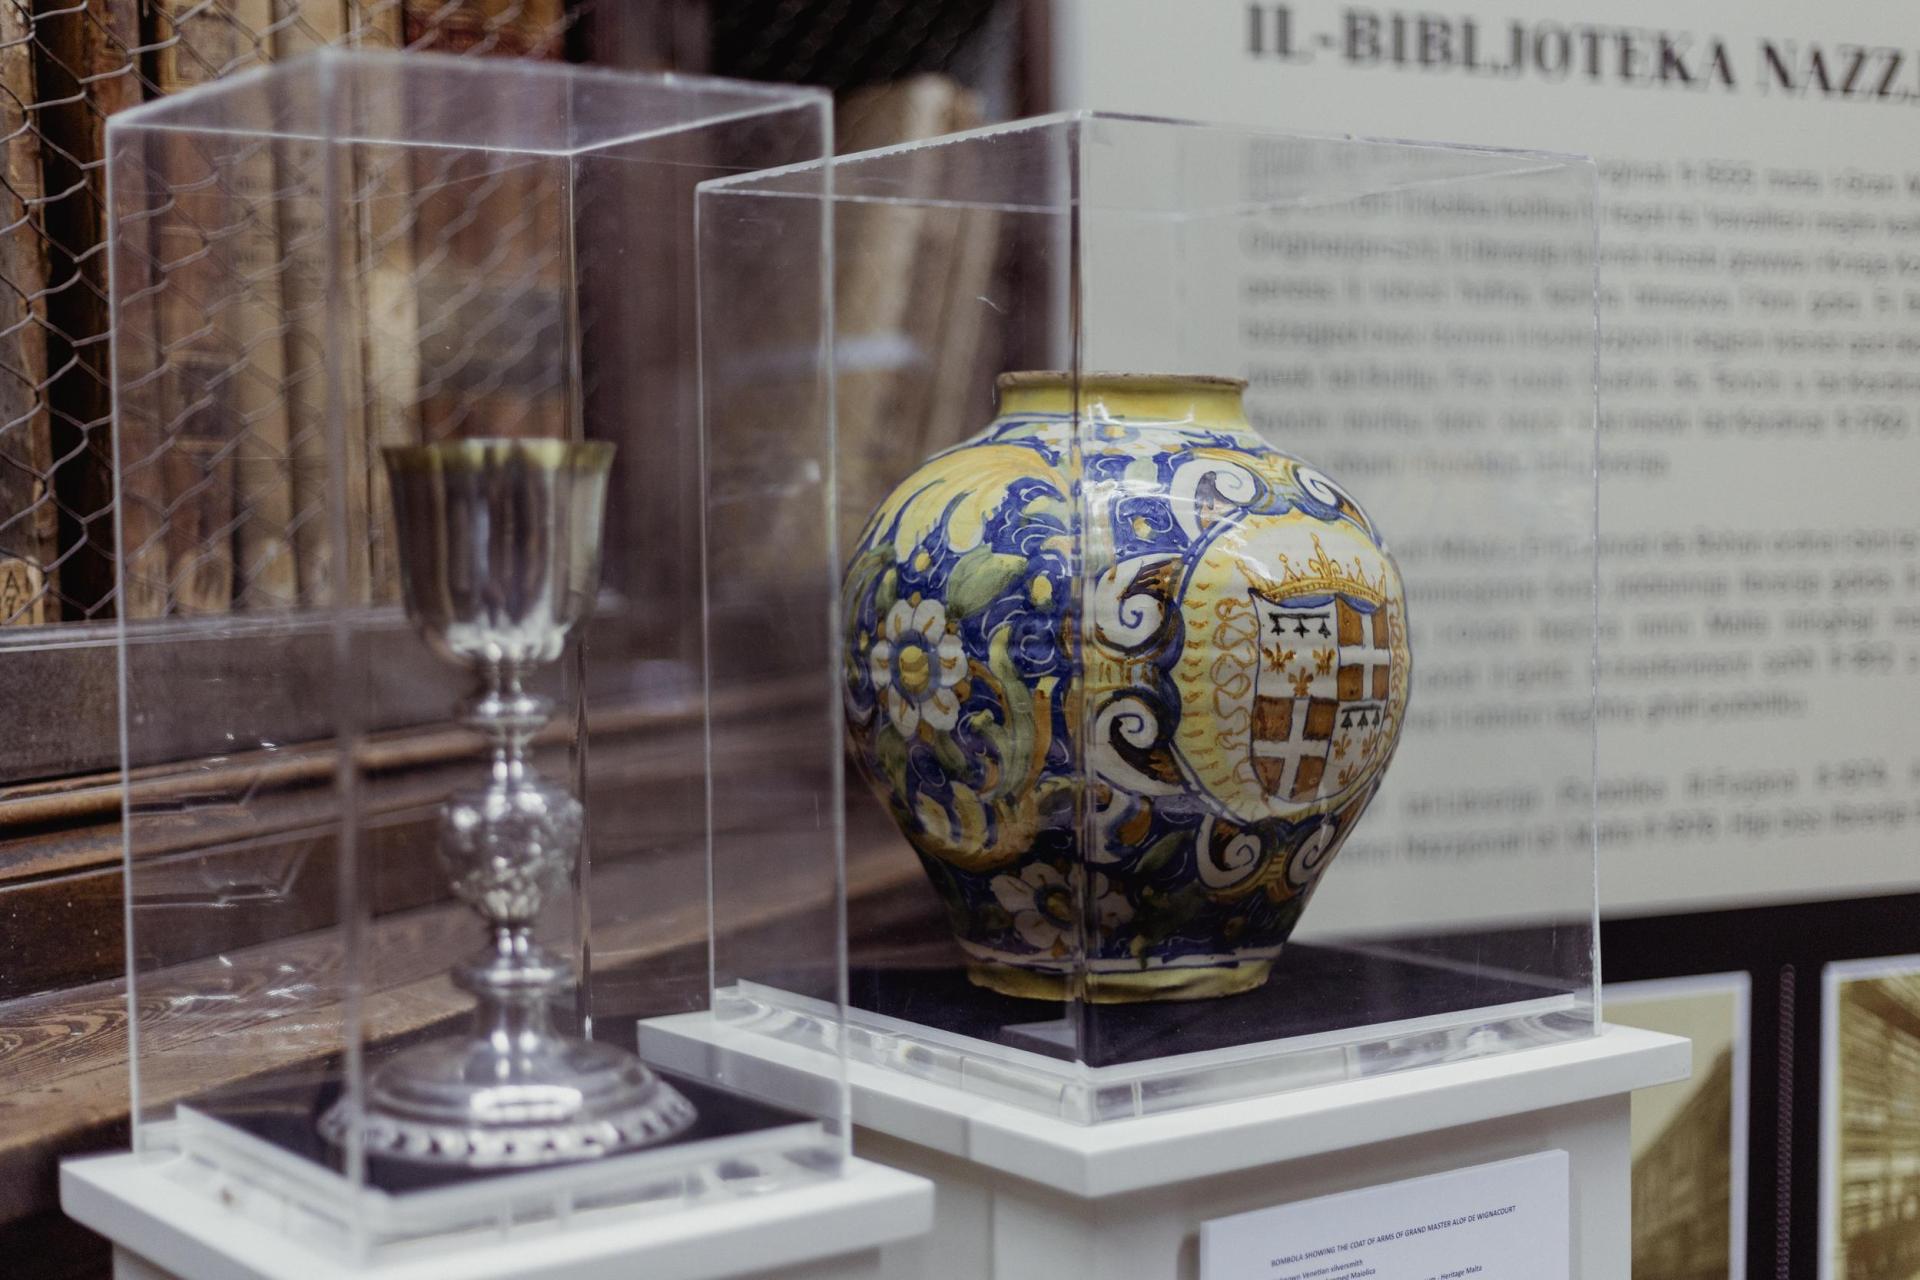 Some of the artefacts on display at the National Library. Photo: Lisa Attard